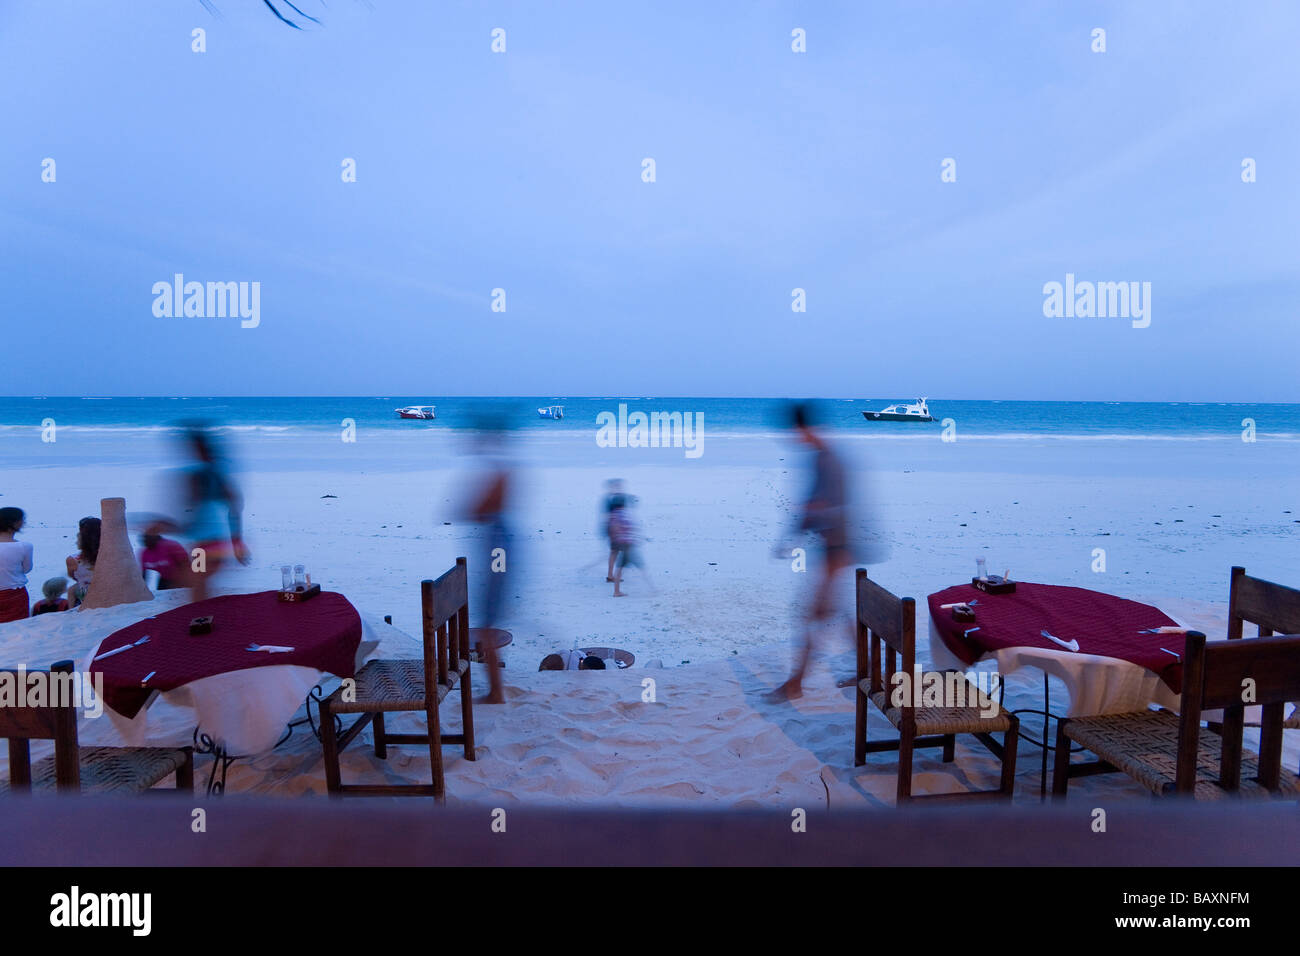 People passing a beach restaurant, The Sands, at Nomad, Diani Beach, Kenya Stock Photo